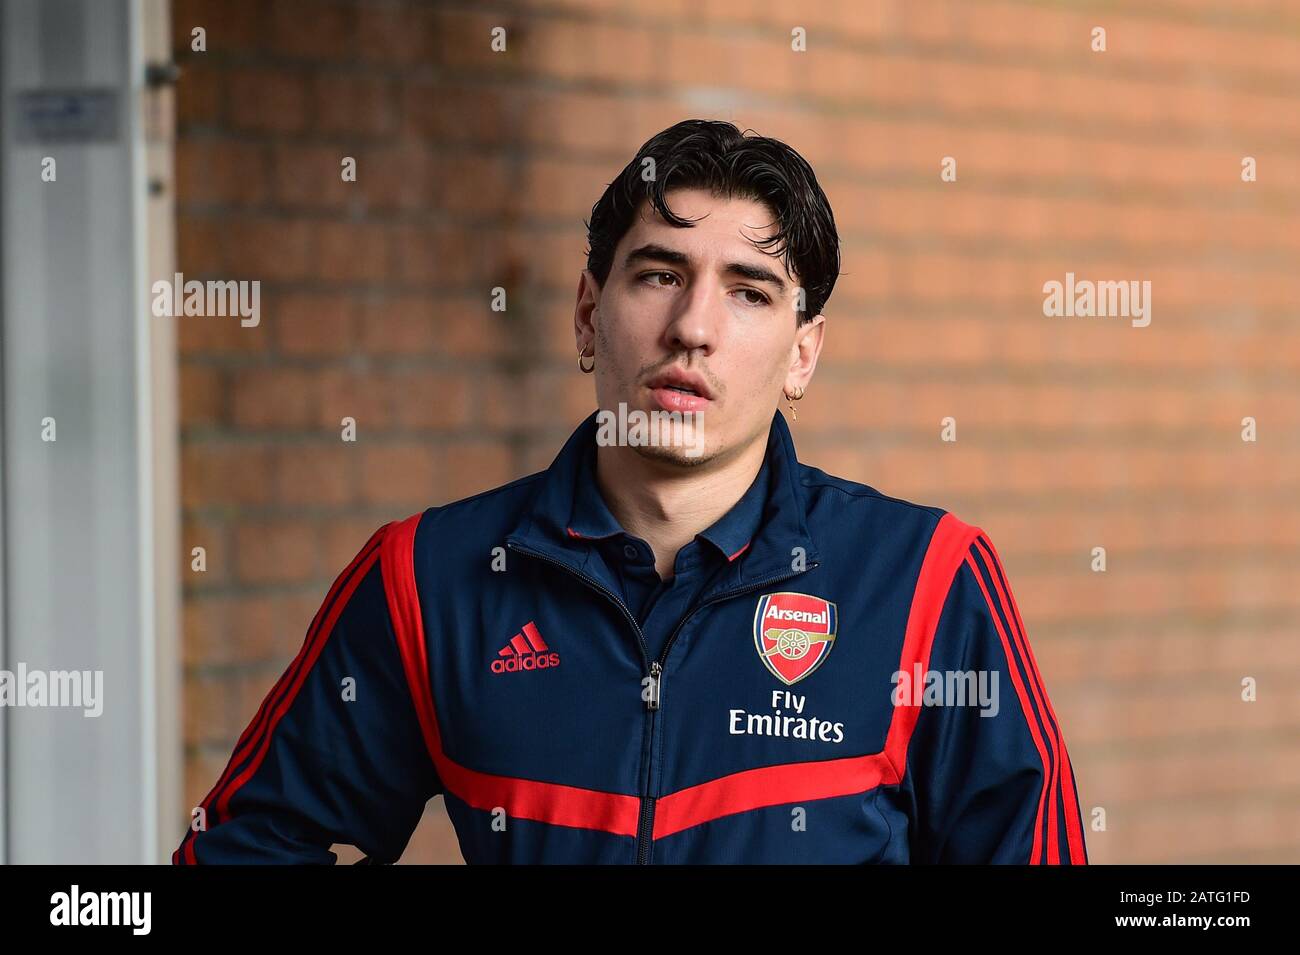 Hector Bellerin delves back into his modelling work as Arsenal full-back  posts pictures on Twitter from his Louis Vuitton photoshoot